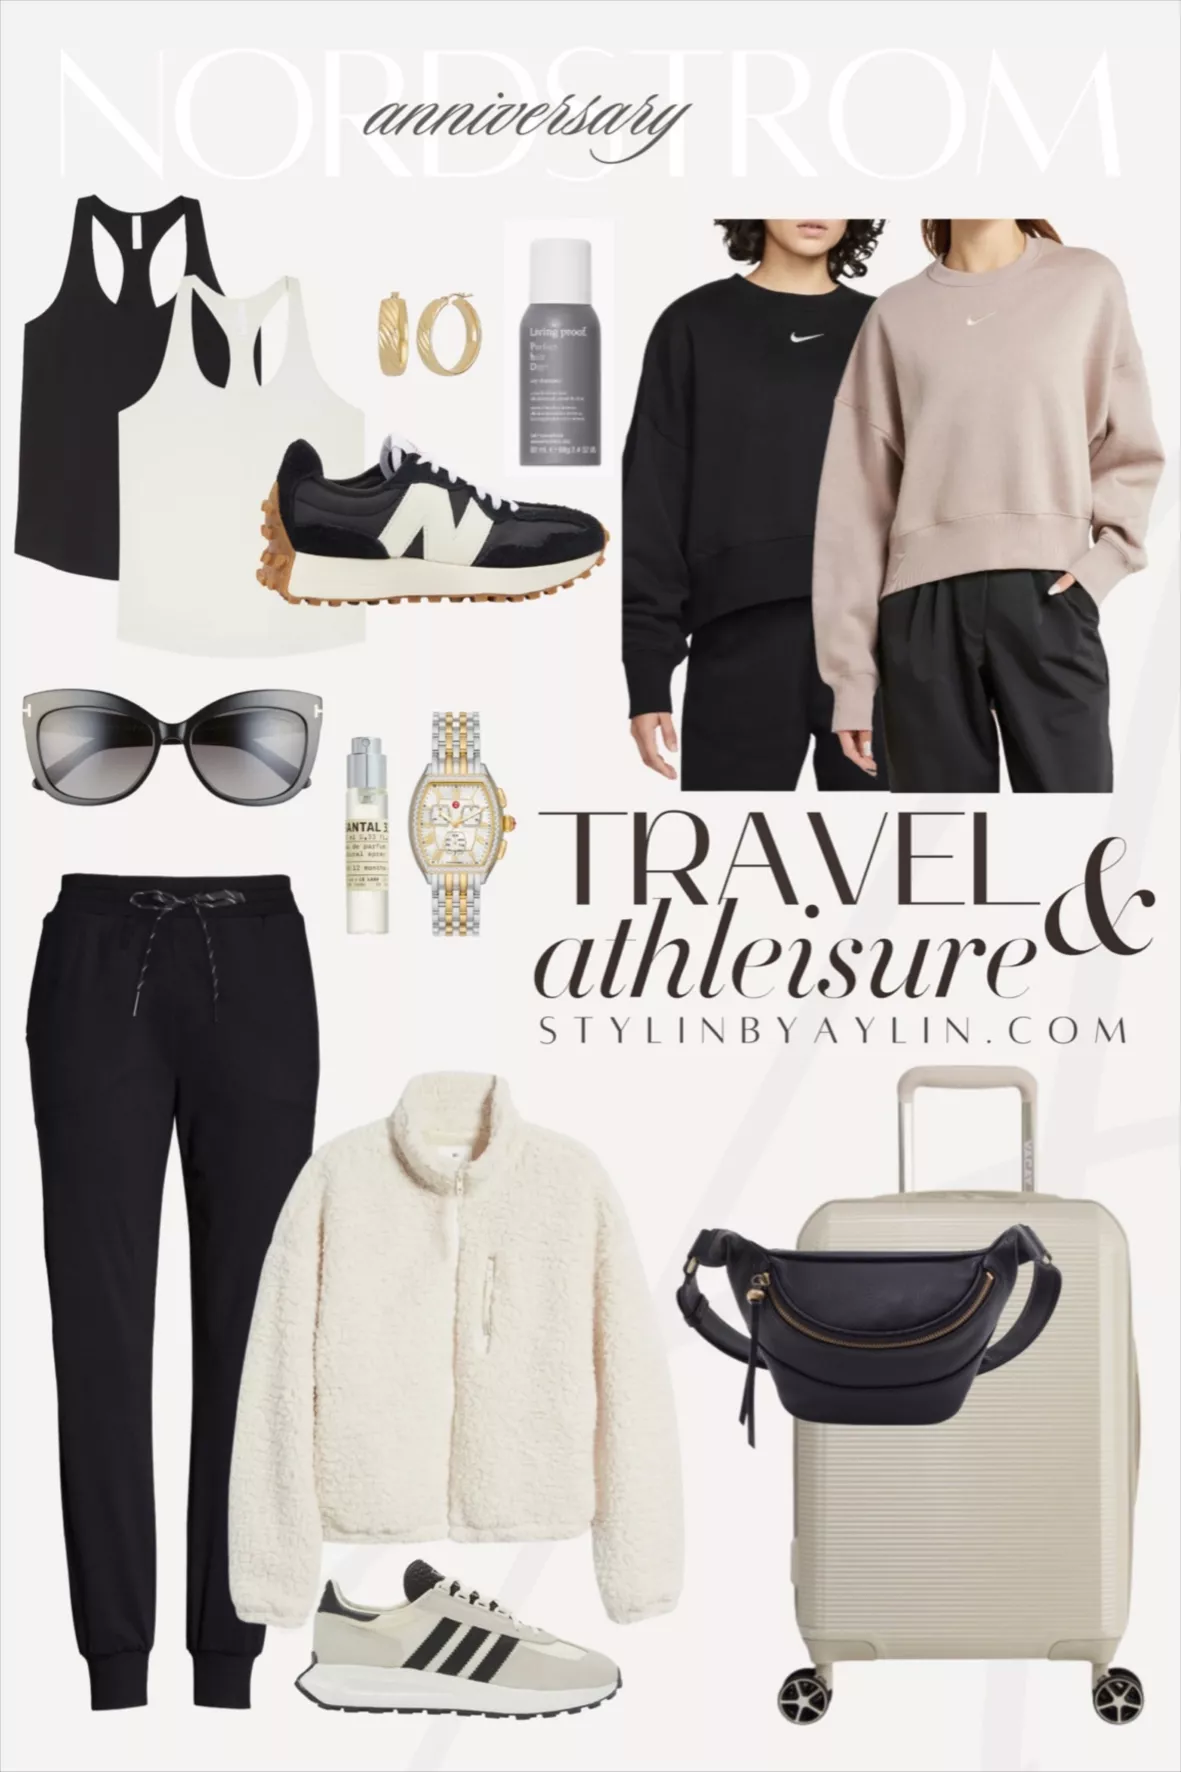 AIRPORT OUTFIT from nordstrom - Stylin by Aylin